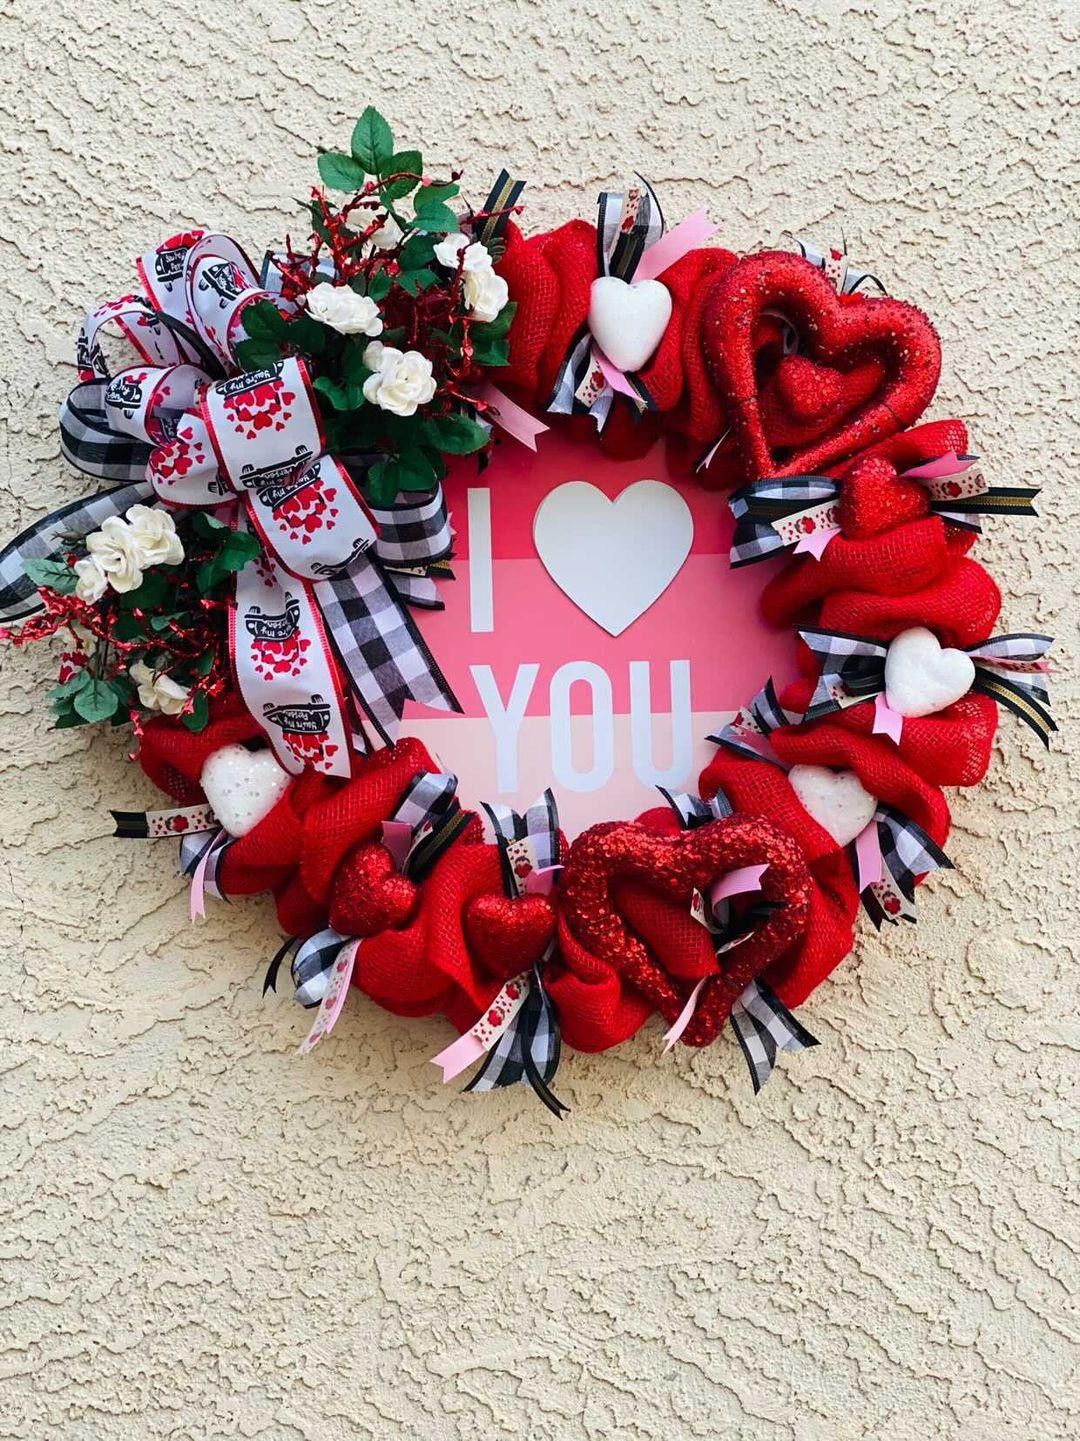 VALENTINE'S DAY WREATH MUST SELL